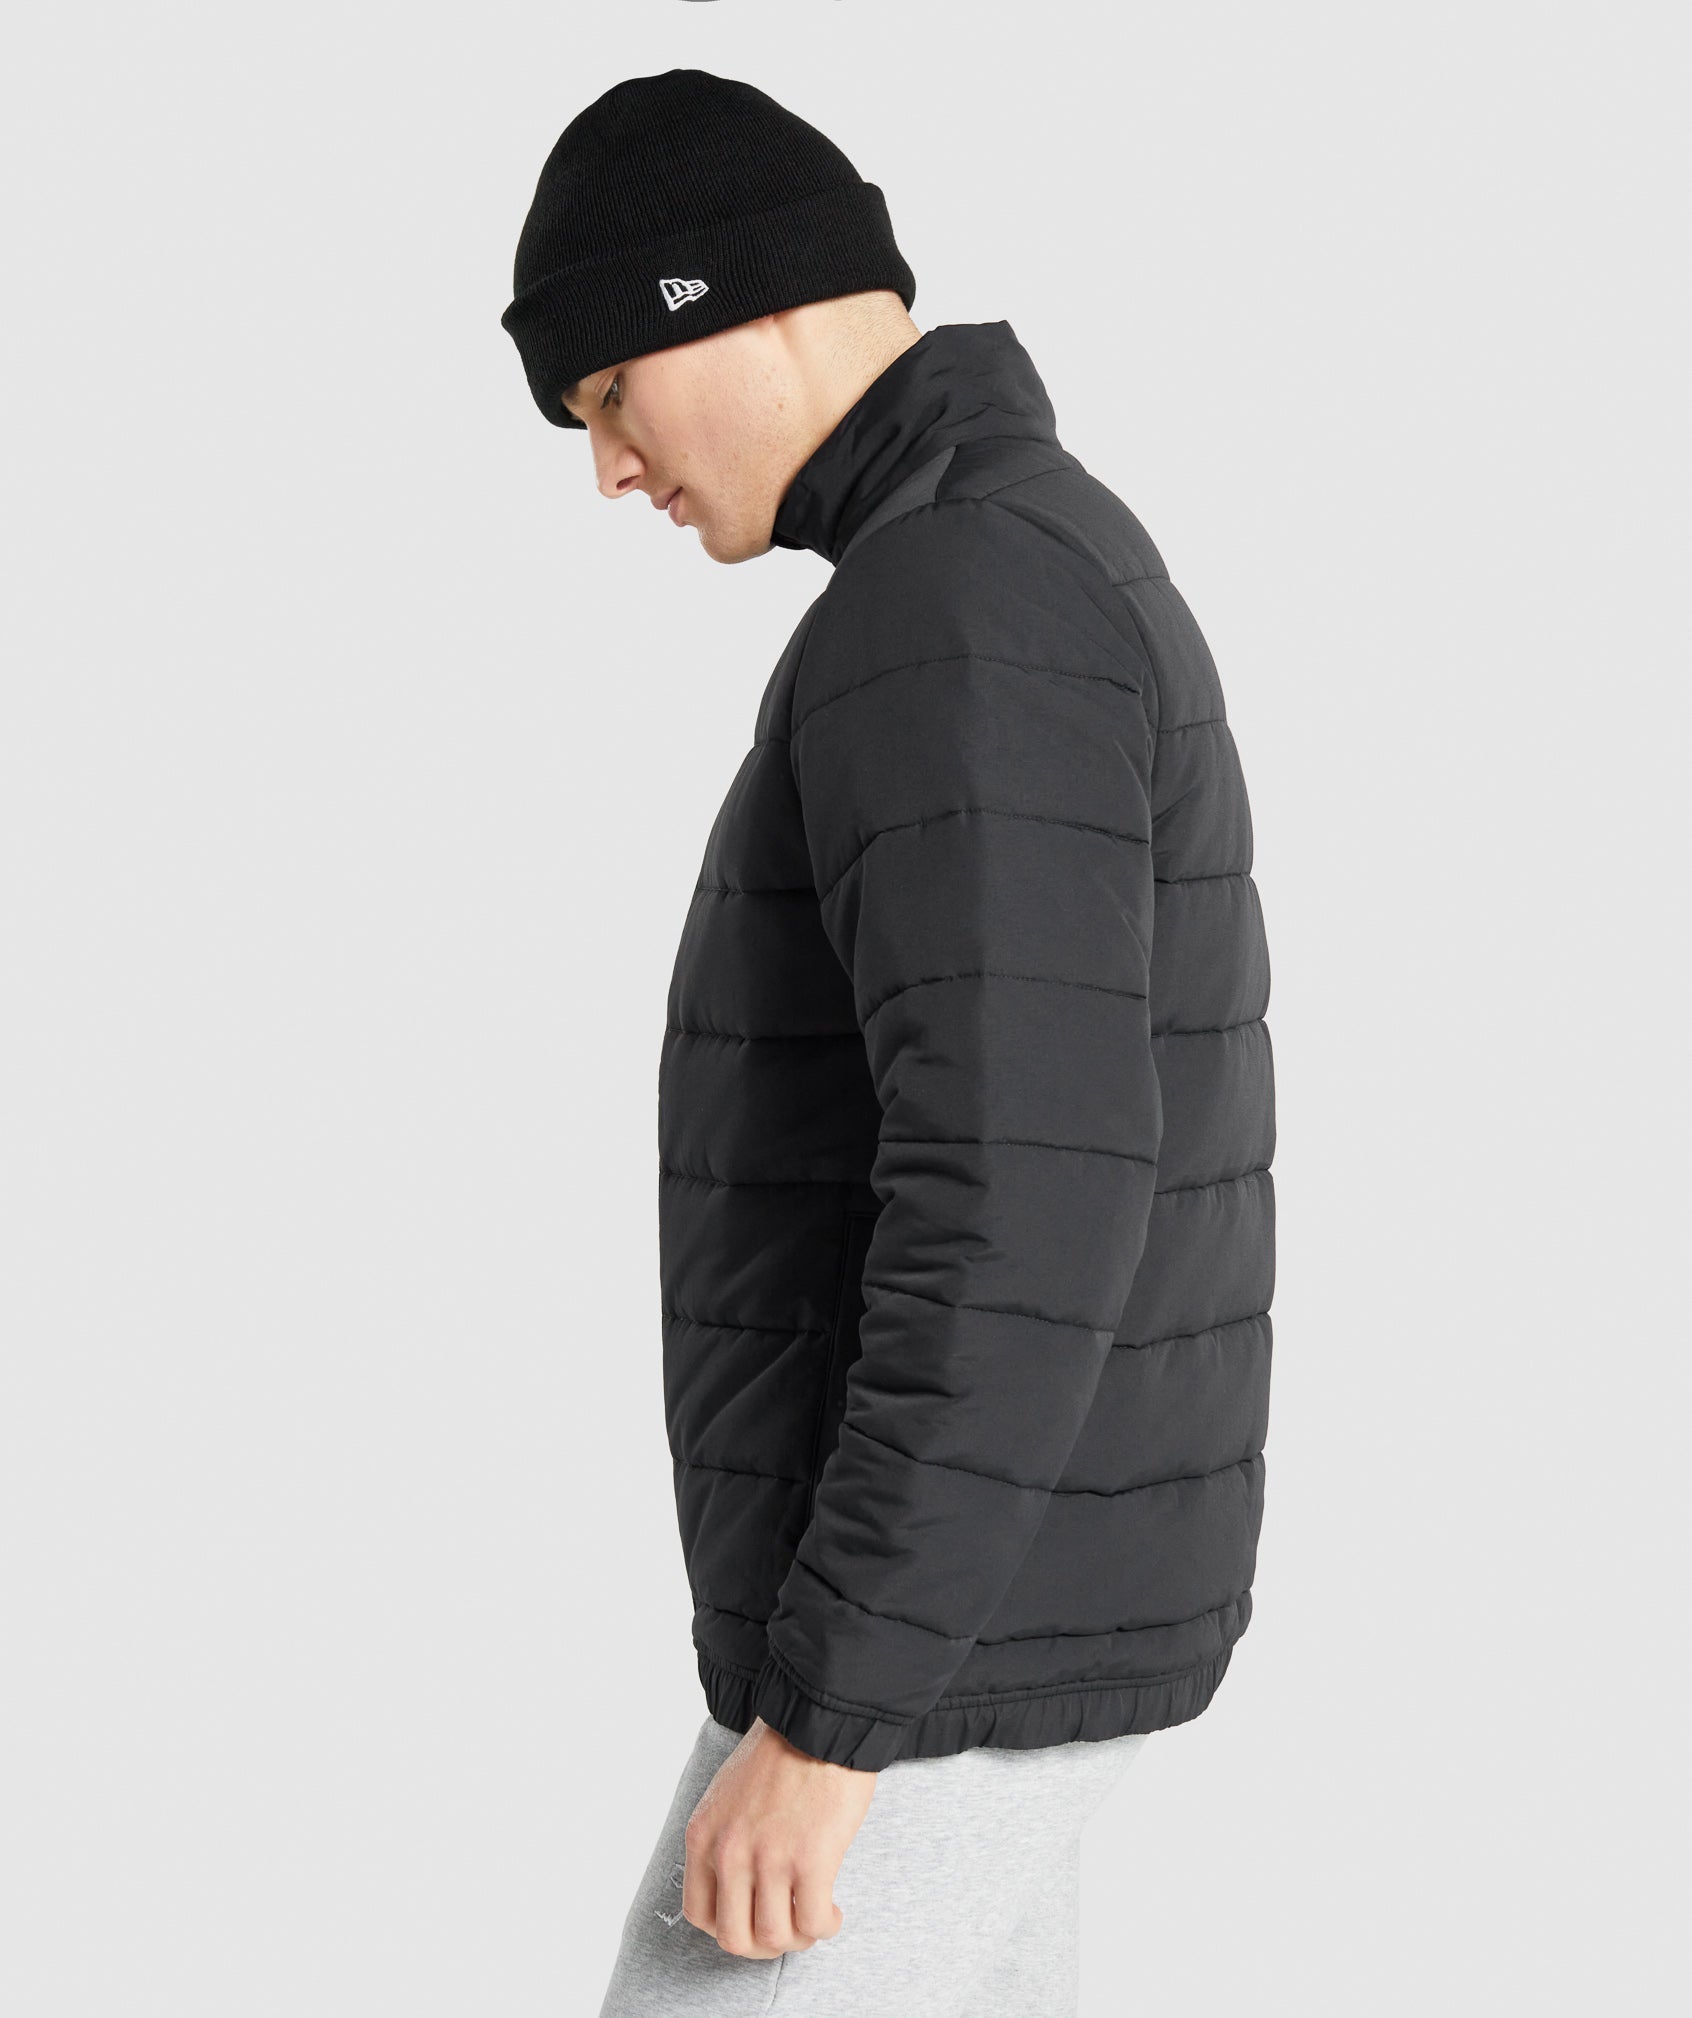 Crest Puffer Jacket in Black - view 4